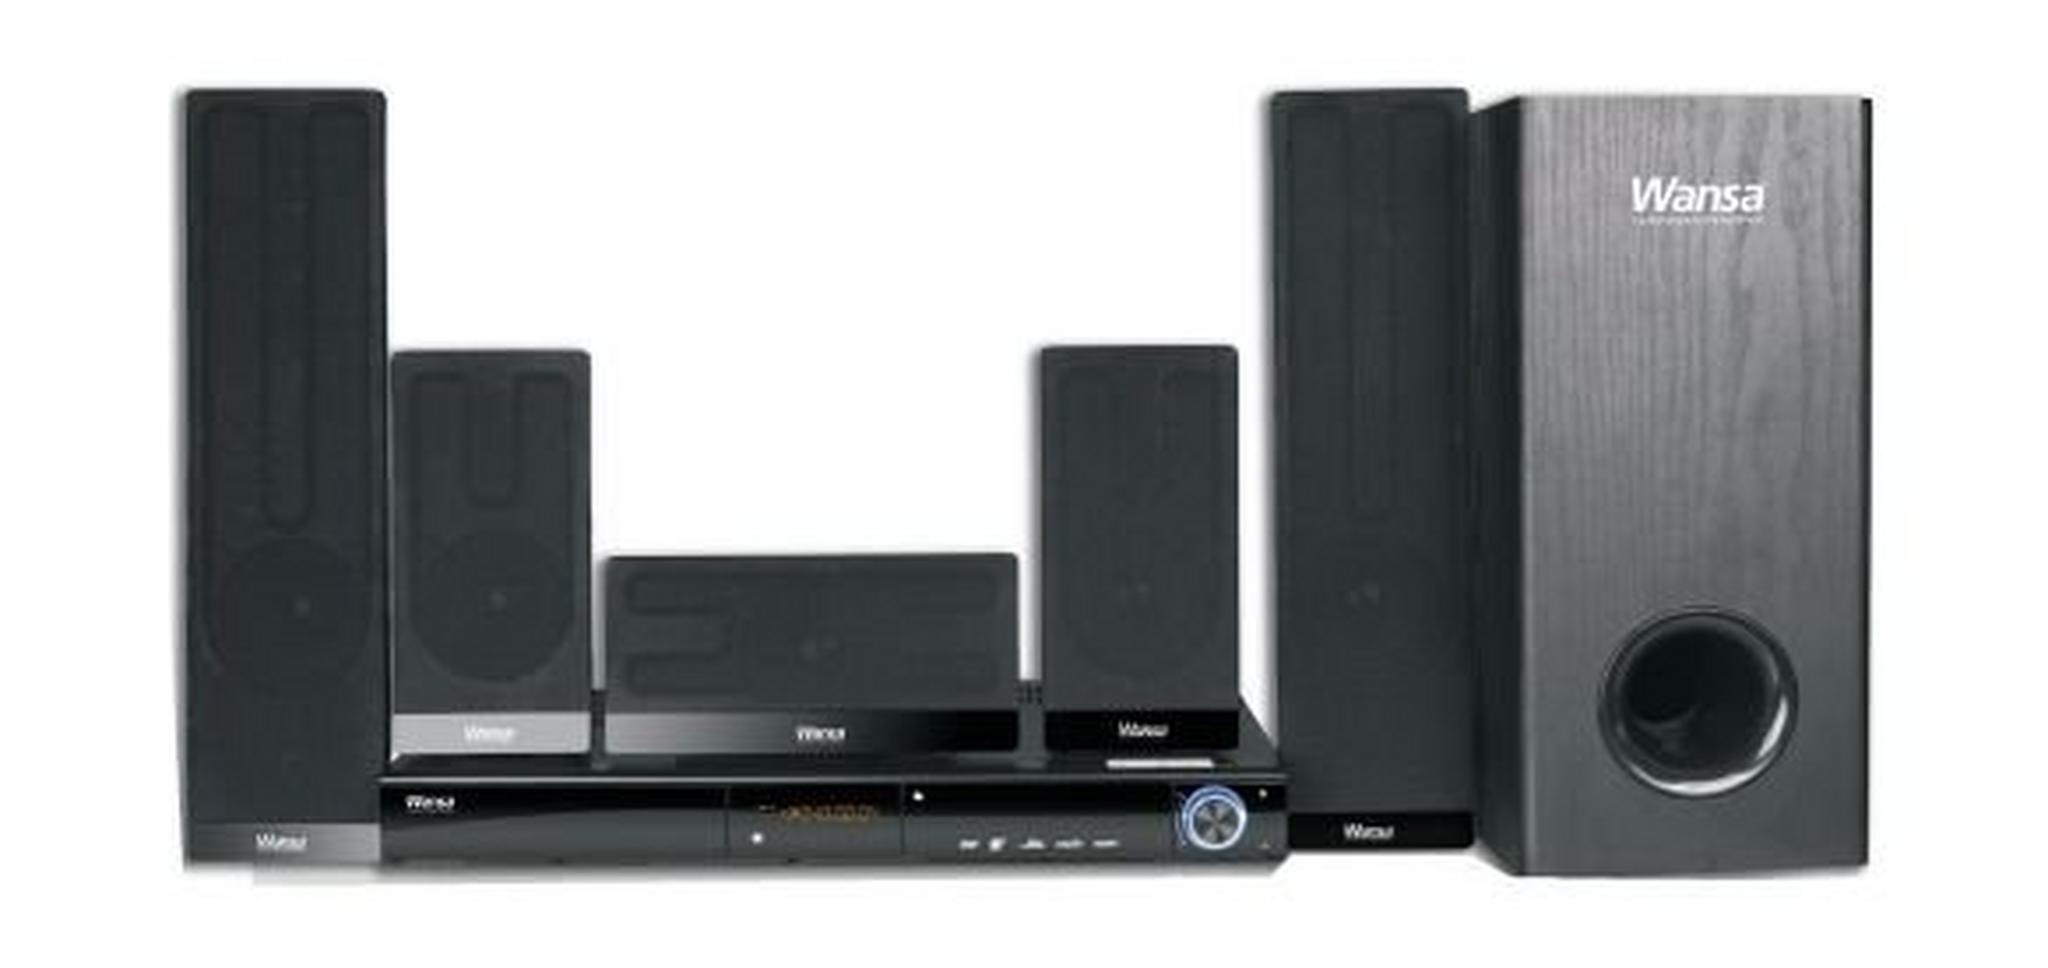 Wansa 5.1Ch All-in-One Home Theater System with HDMI (BK-722AC) - 105W